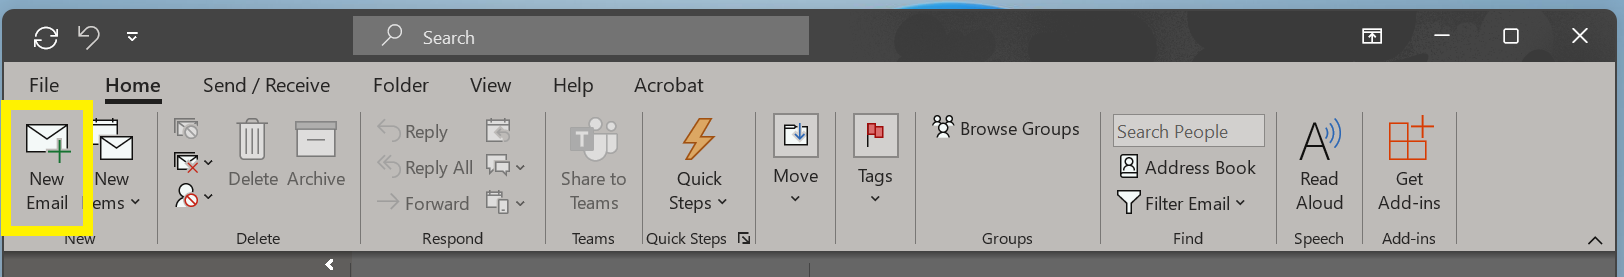 Home Toolbar in Outlook. New Email Button has highlighted box in the top left corner.